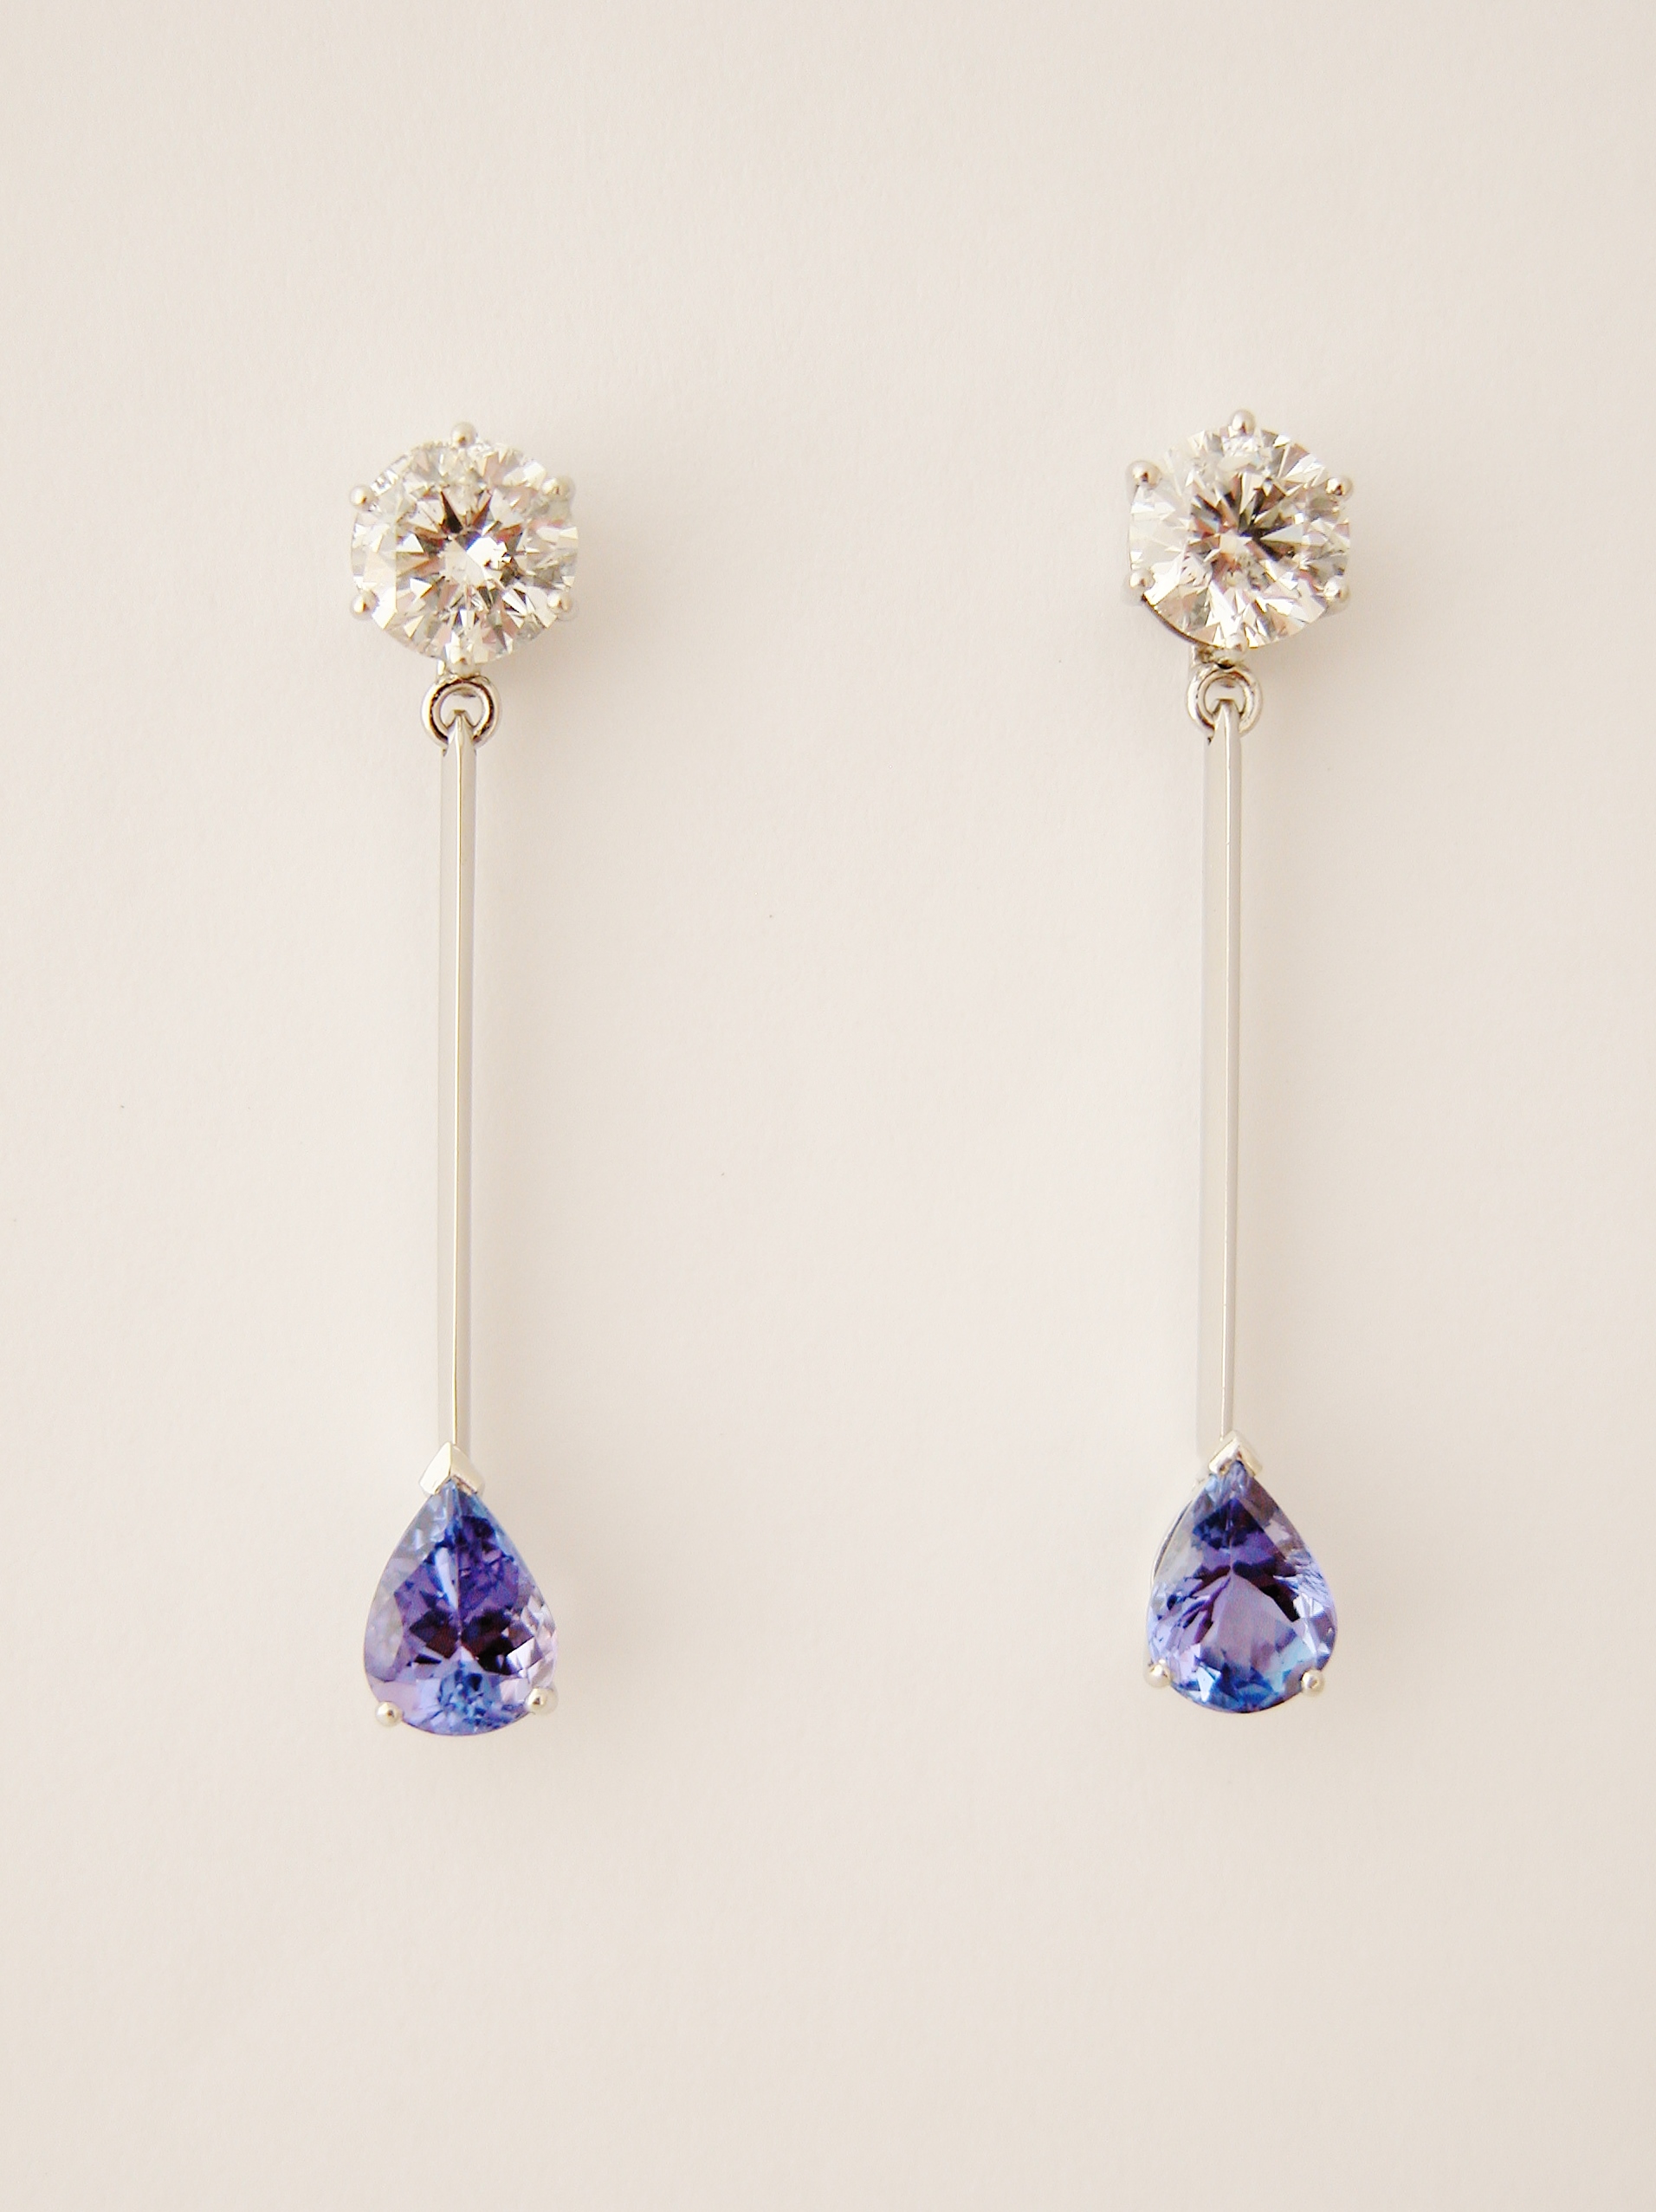 Pair of round brilliant cut Diamond stud earrings with a single pear shaped Tanzanite set at the bottom of a fine wire giving a pendulum effect.